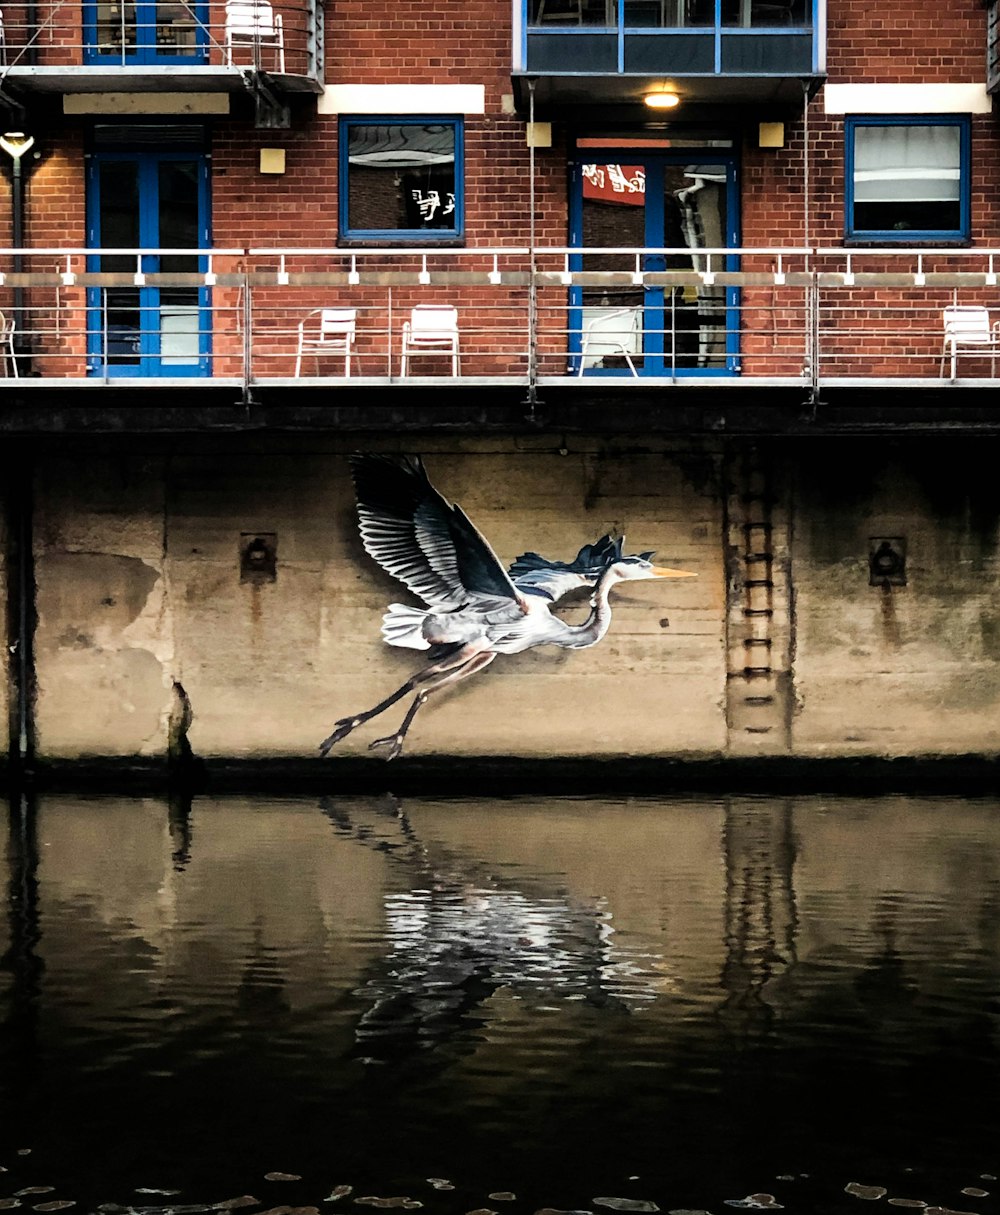 pelican wall painting near body of water